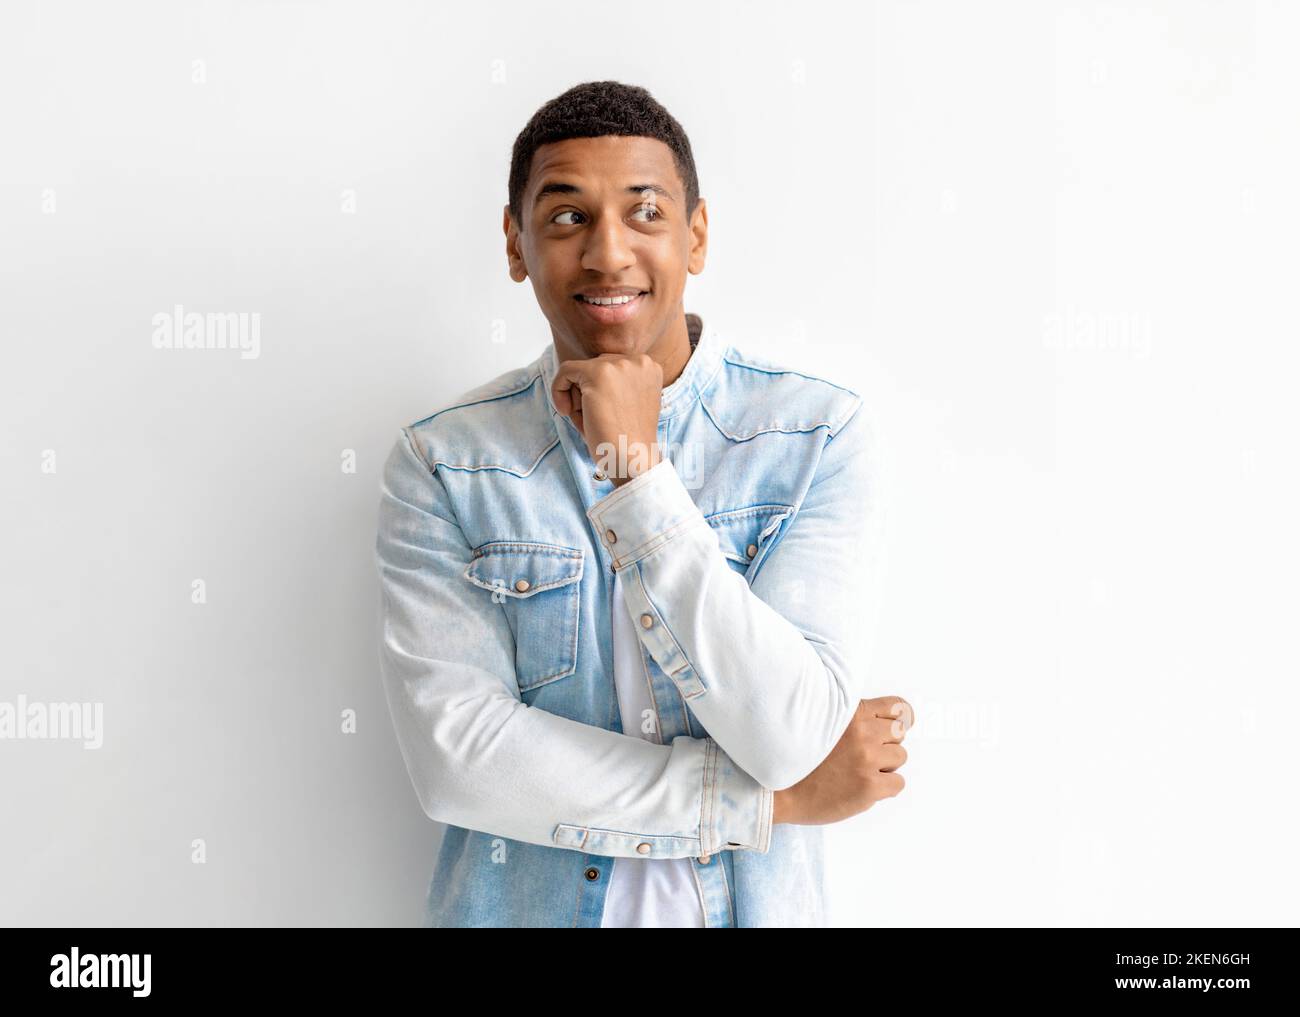 Portrait of young smiling African American man in a denim shirt looking away and thinks about something Stock Photo